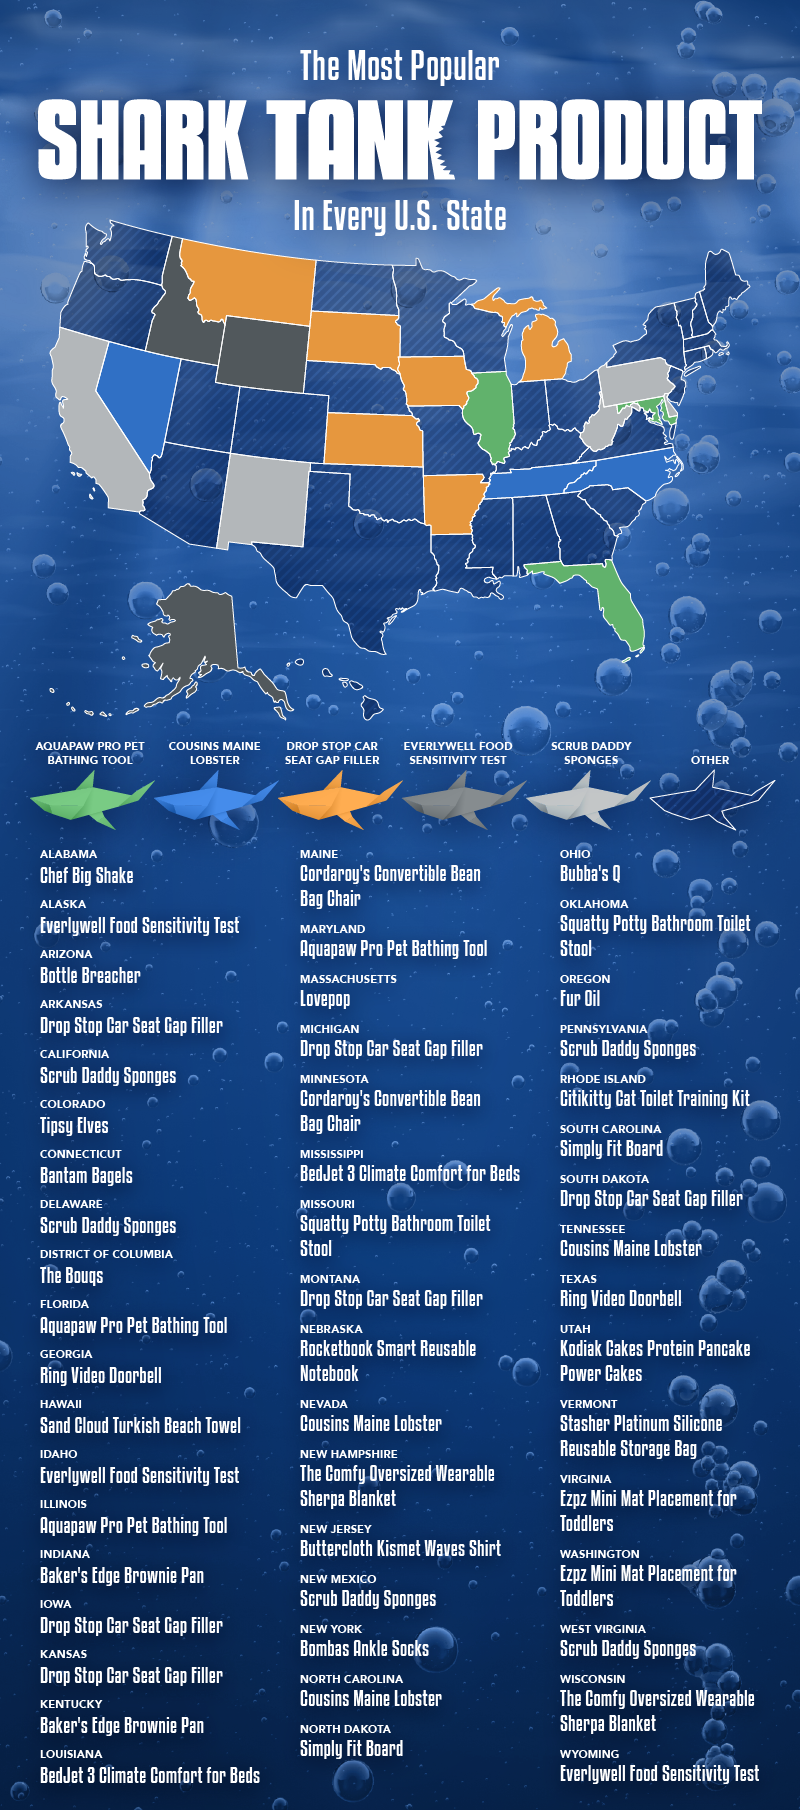 The Most Popular Shark Tank Product in Every State [2022 Study]